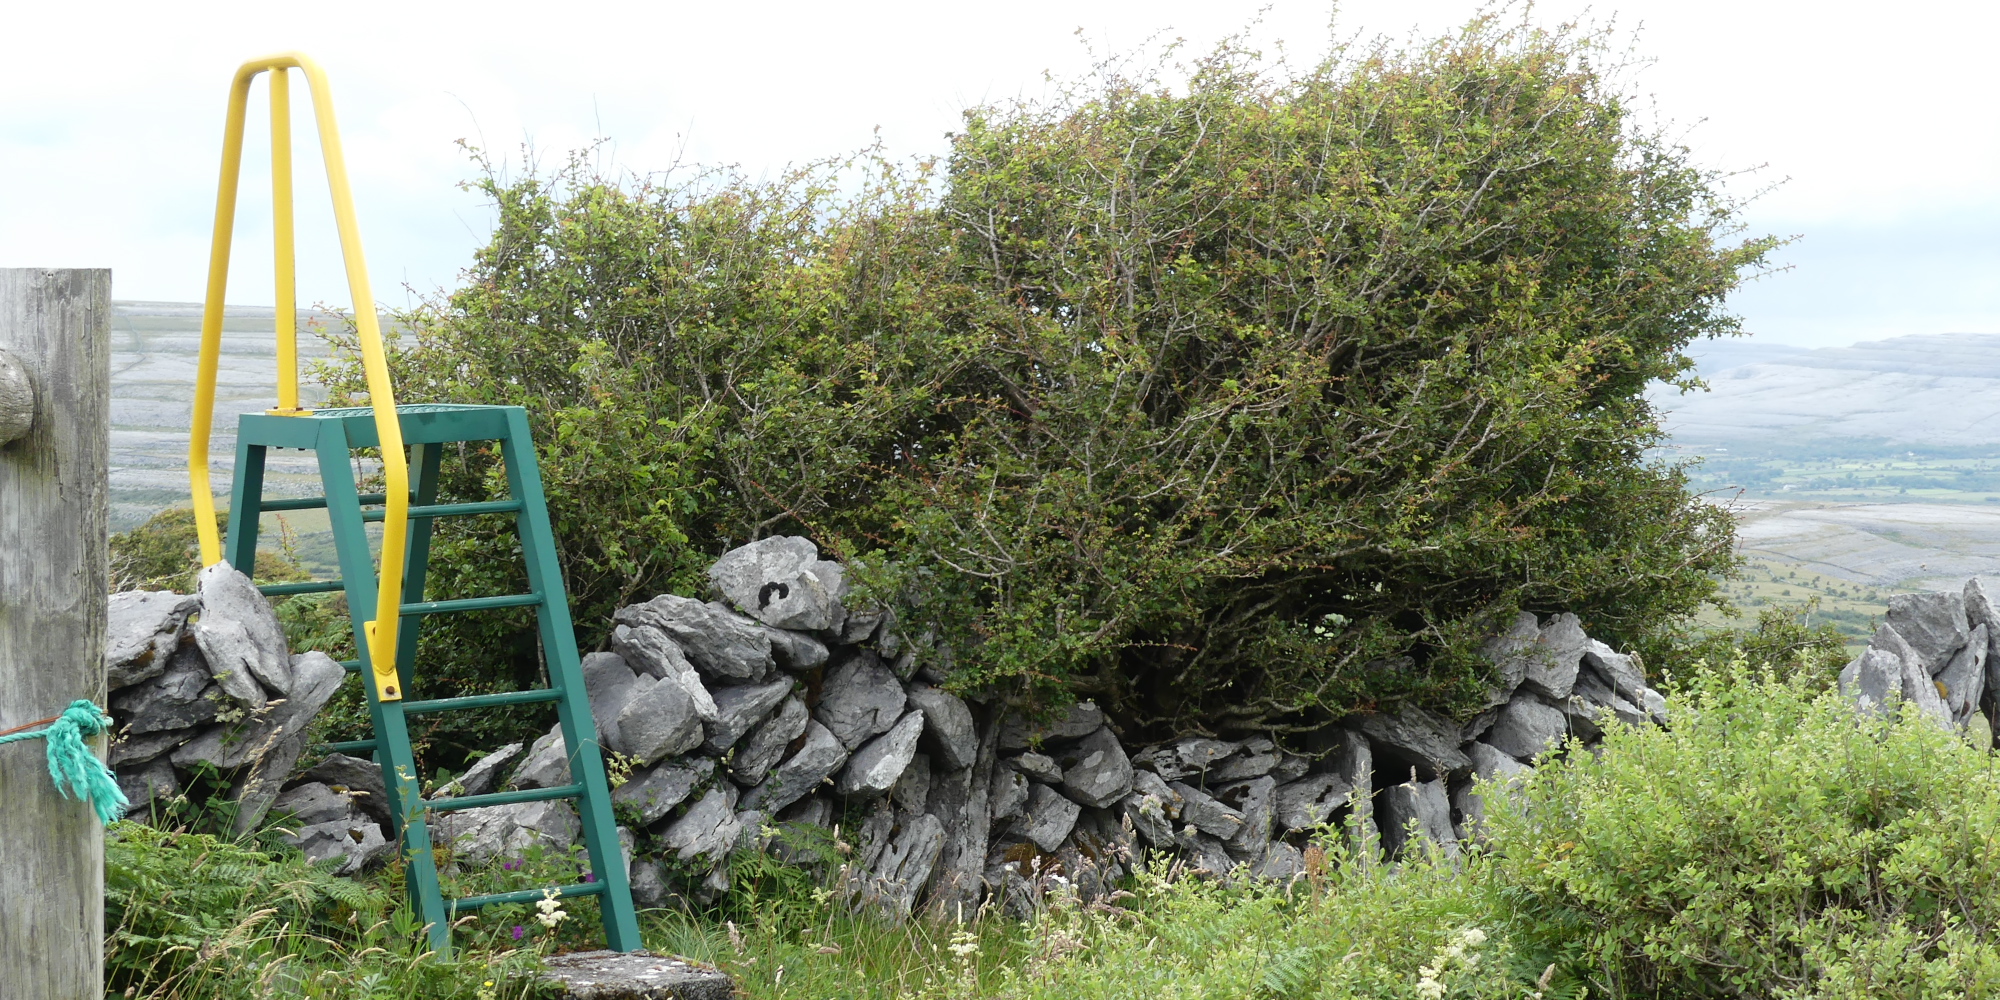 Photo of a stile over a rock wall, this particular style is nicely painted green metal with a yellow hand rail